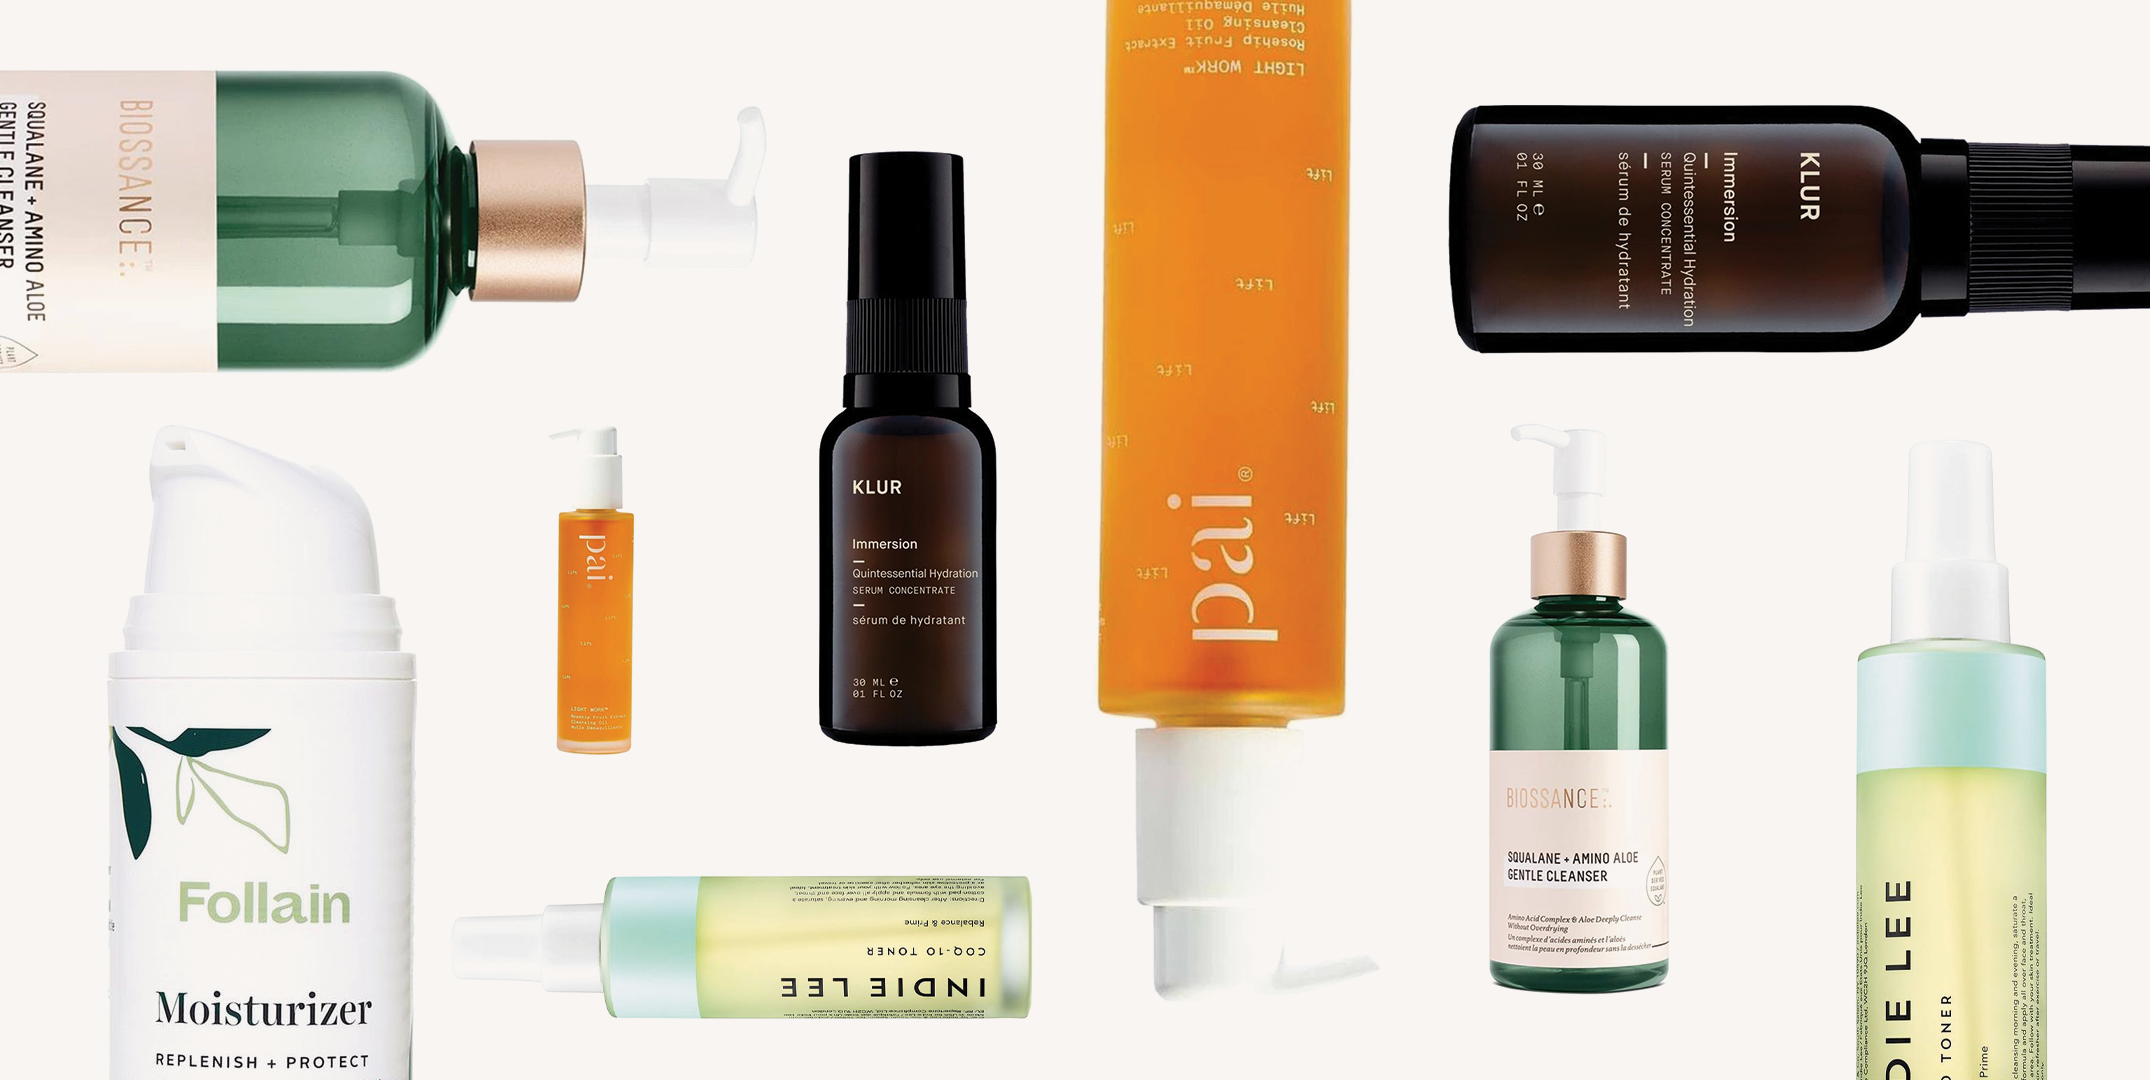 12 Best Natural Organic Makeup Brands That are Truly Clean